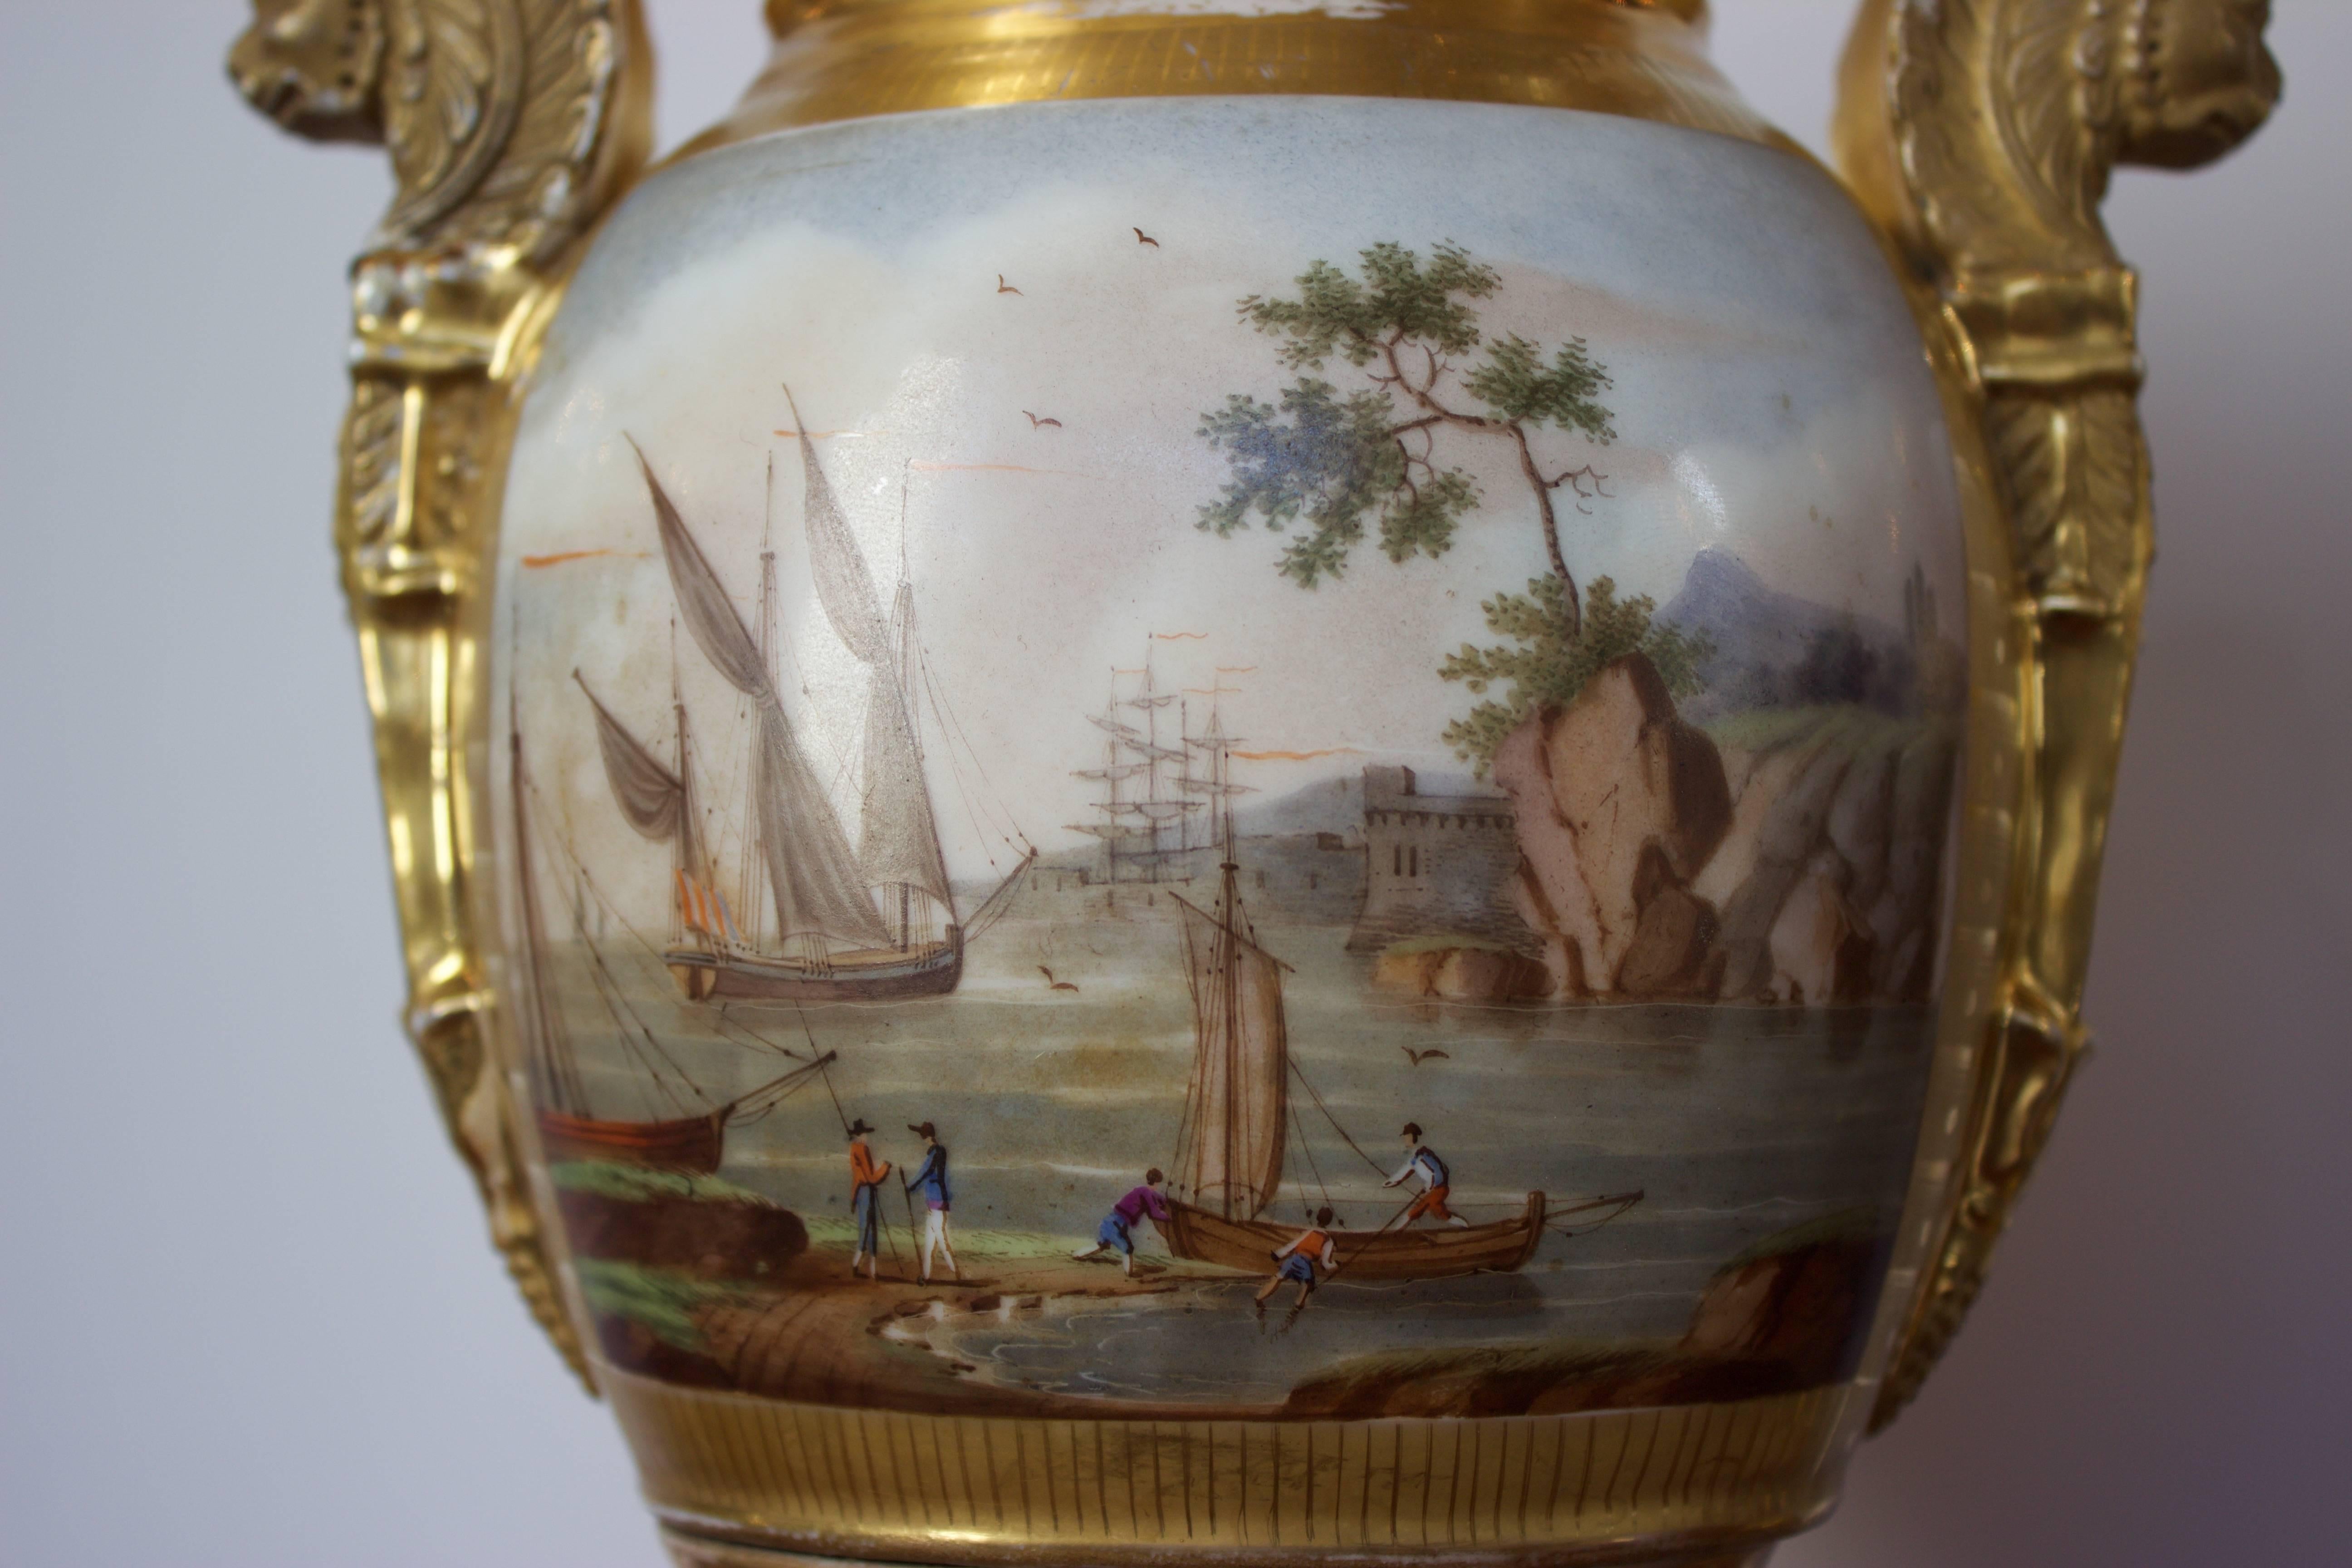 Hand-Painted Pair of Empire Period Porcelain Vases with Maritime Scene